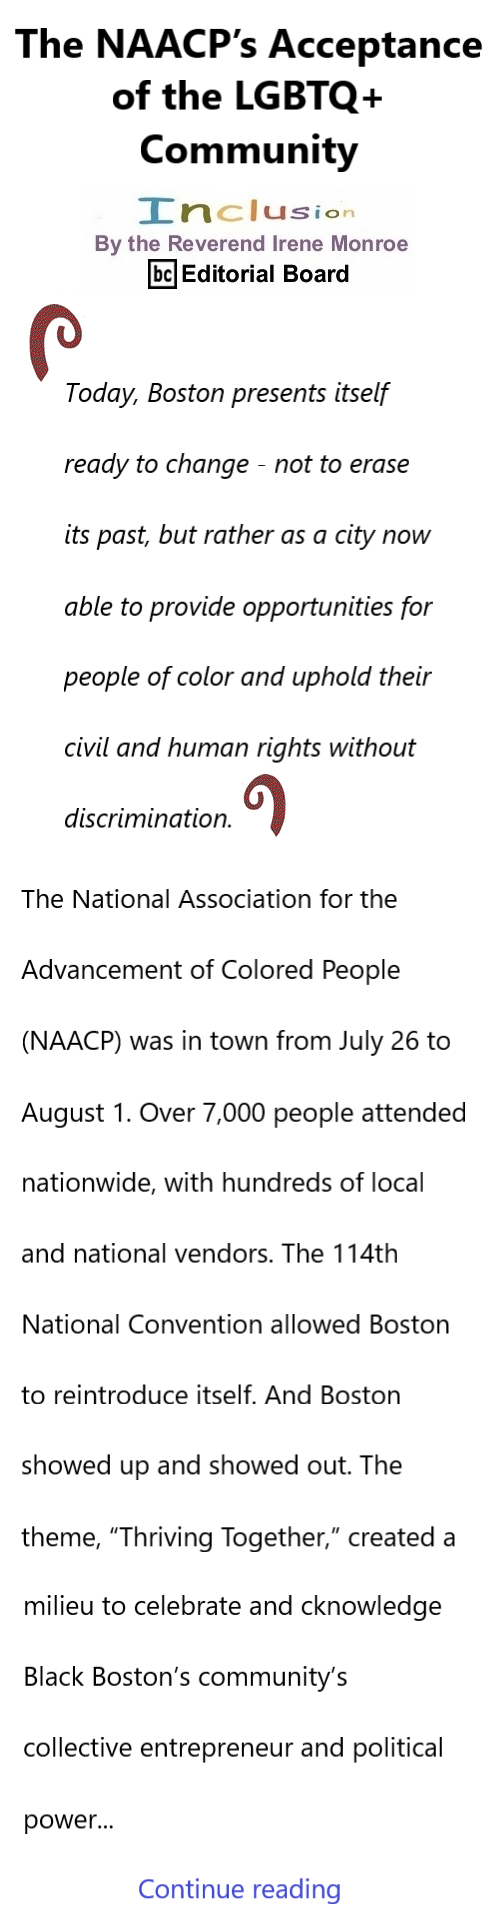 BlackCommentator.com Sept 7, 2023 - Issue 968: The NAACP’s Acceptance of the LGBTQ+ Community - Inclusion By The Reverend Irene Monroe, BC Editorial Board